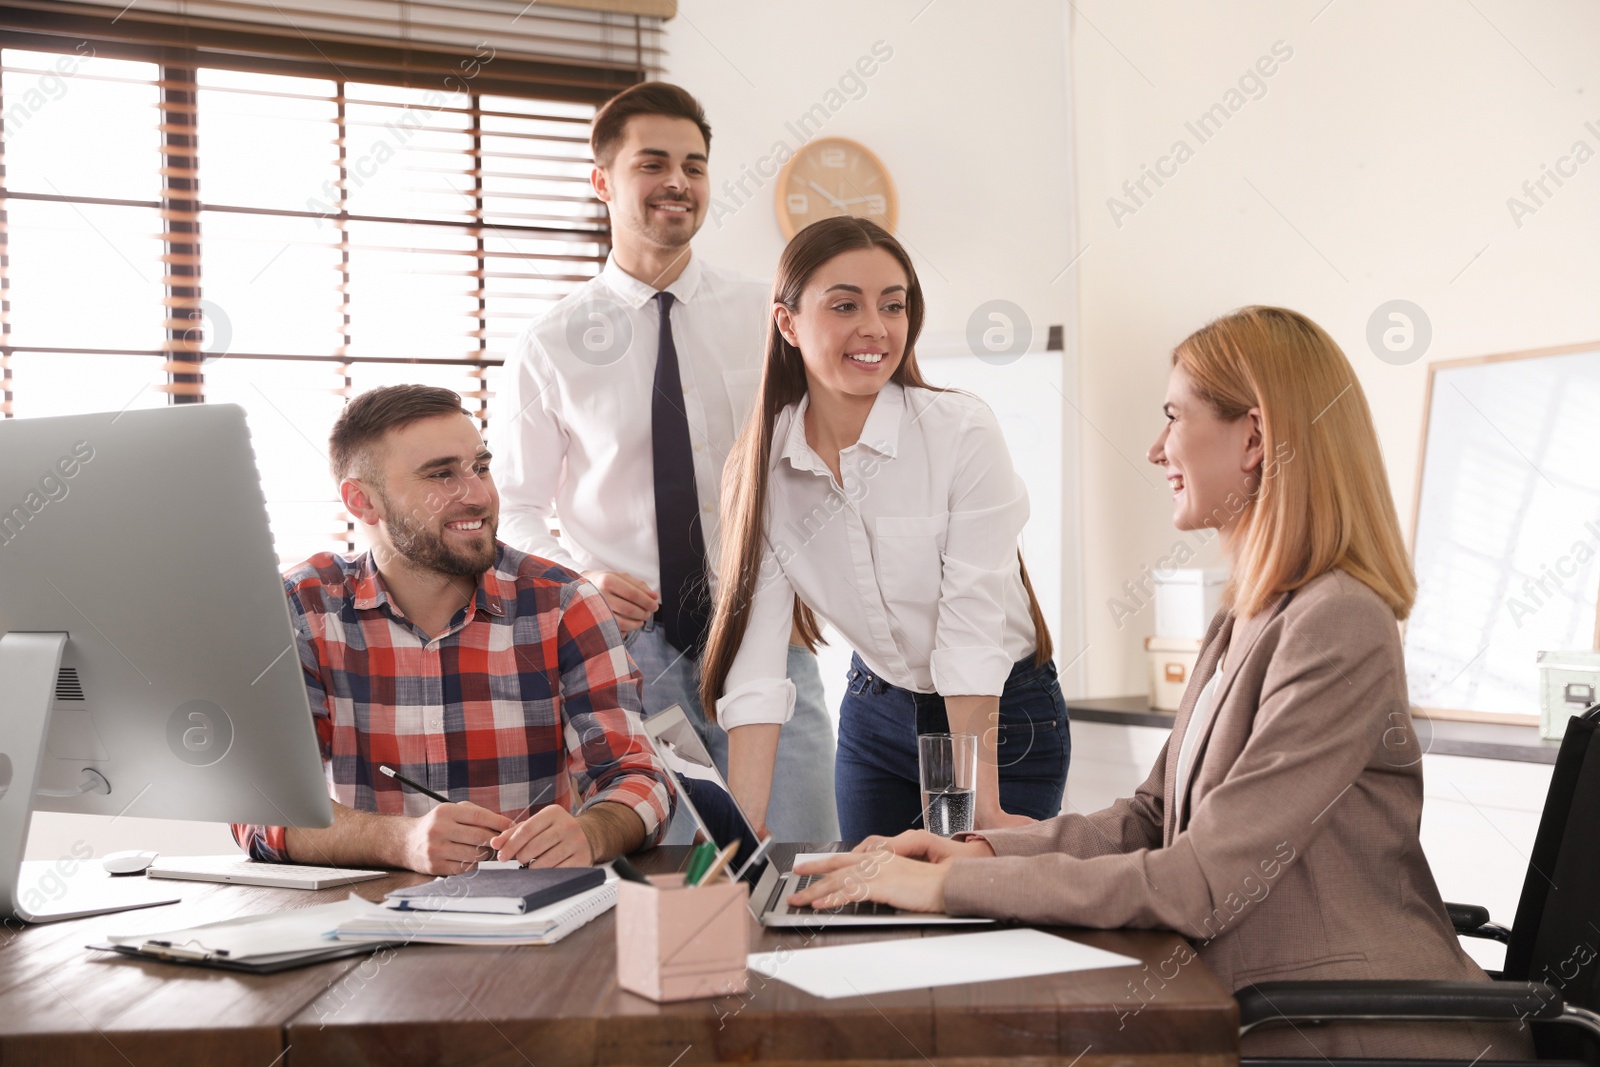 Photo of Woman in wheelchair with her colleagues at workplace